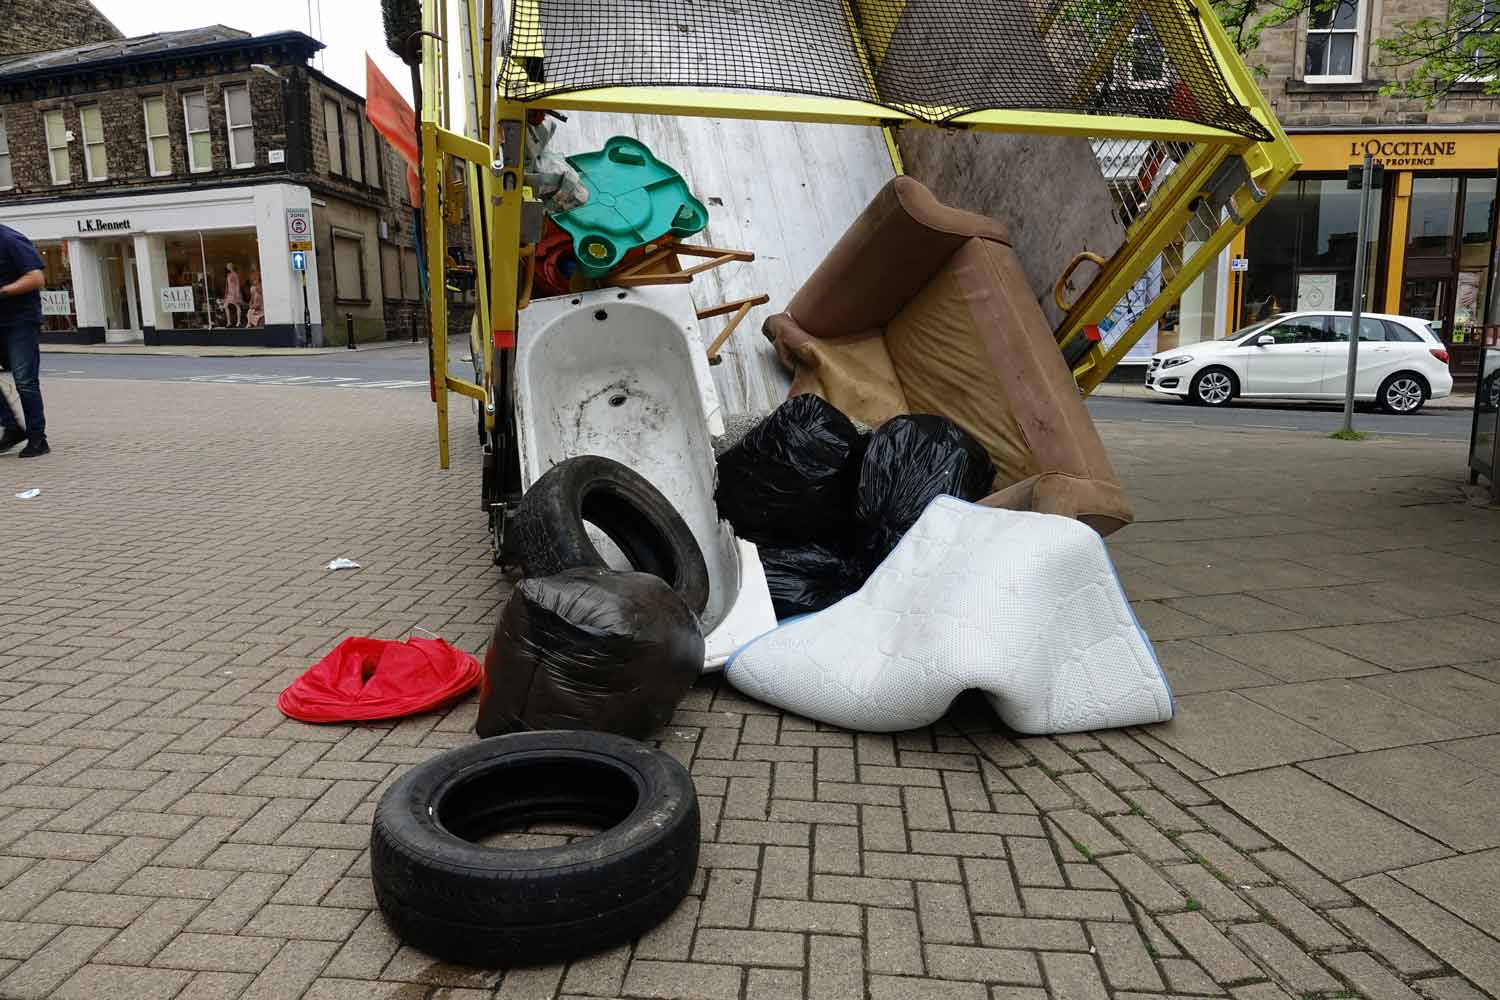 It’s hoped the visual display of fly-tipped rubbish in Harrogate town centre on Tuesday 5 June will be enough to encourage residents to think twice about their responsibilities.